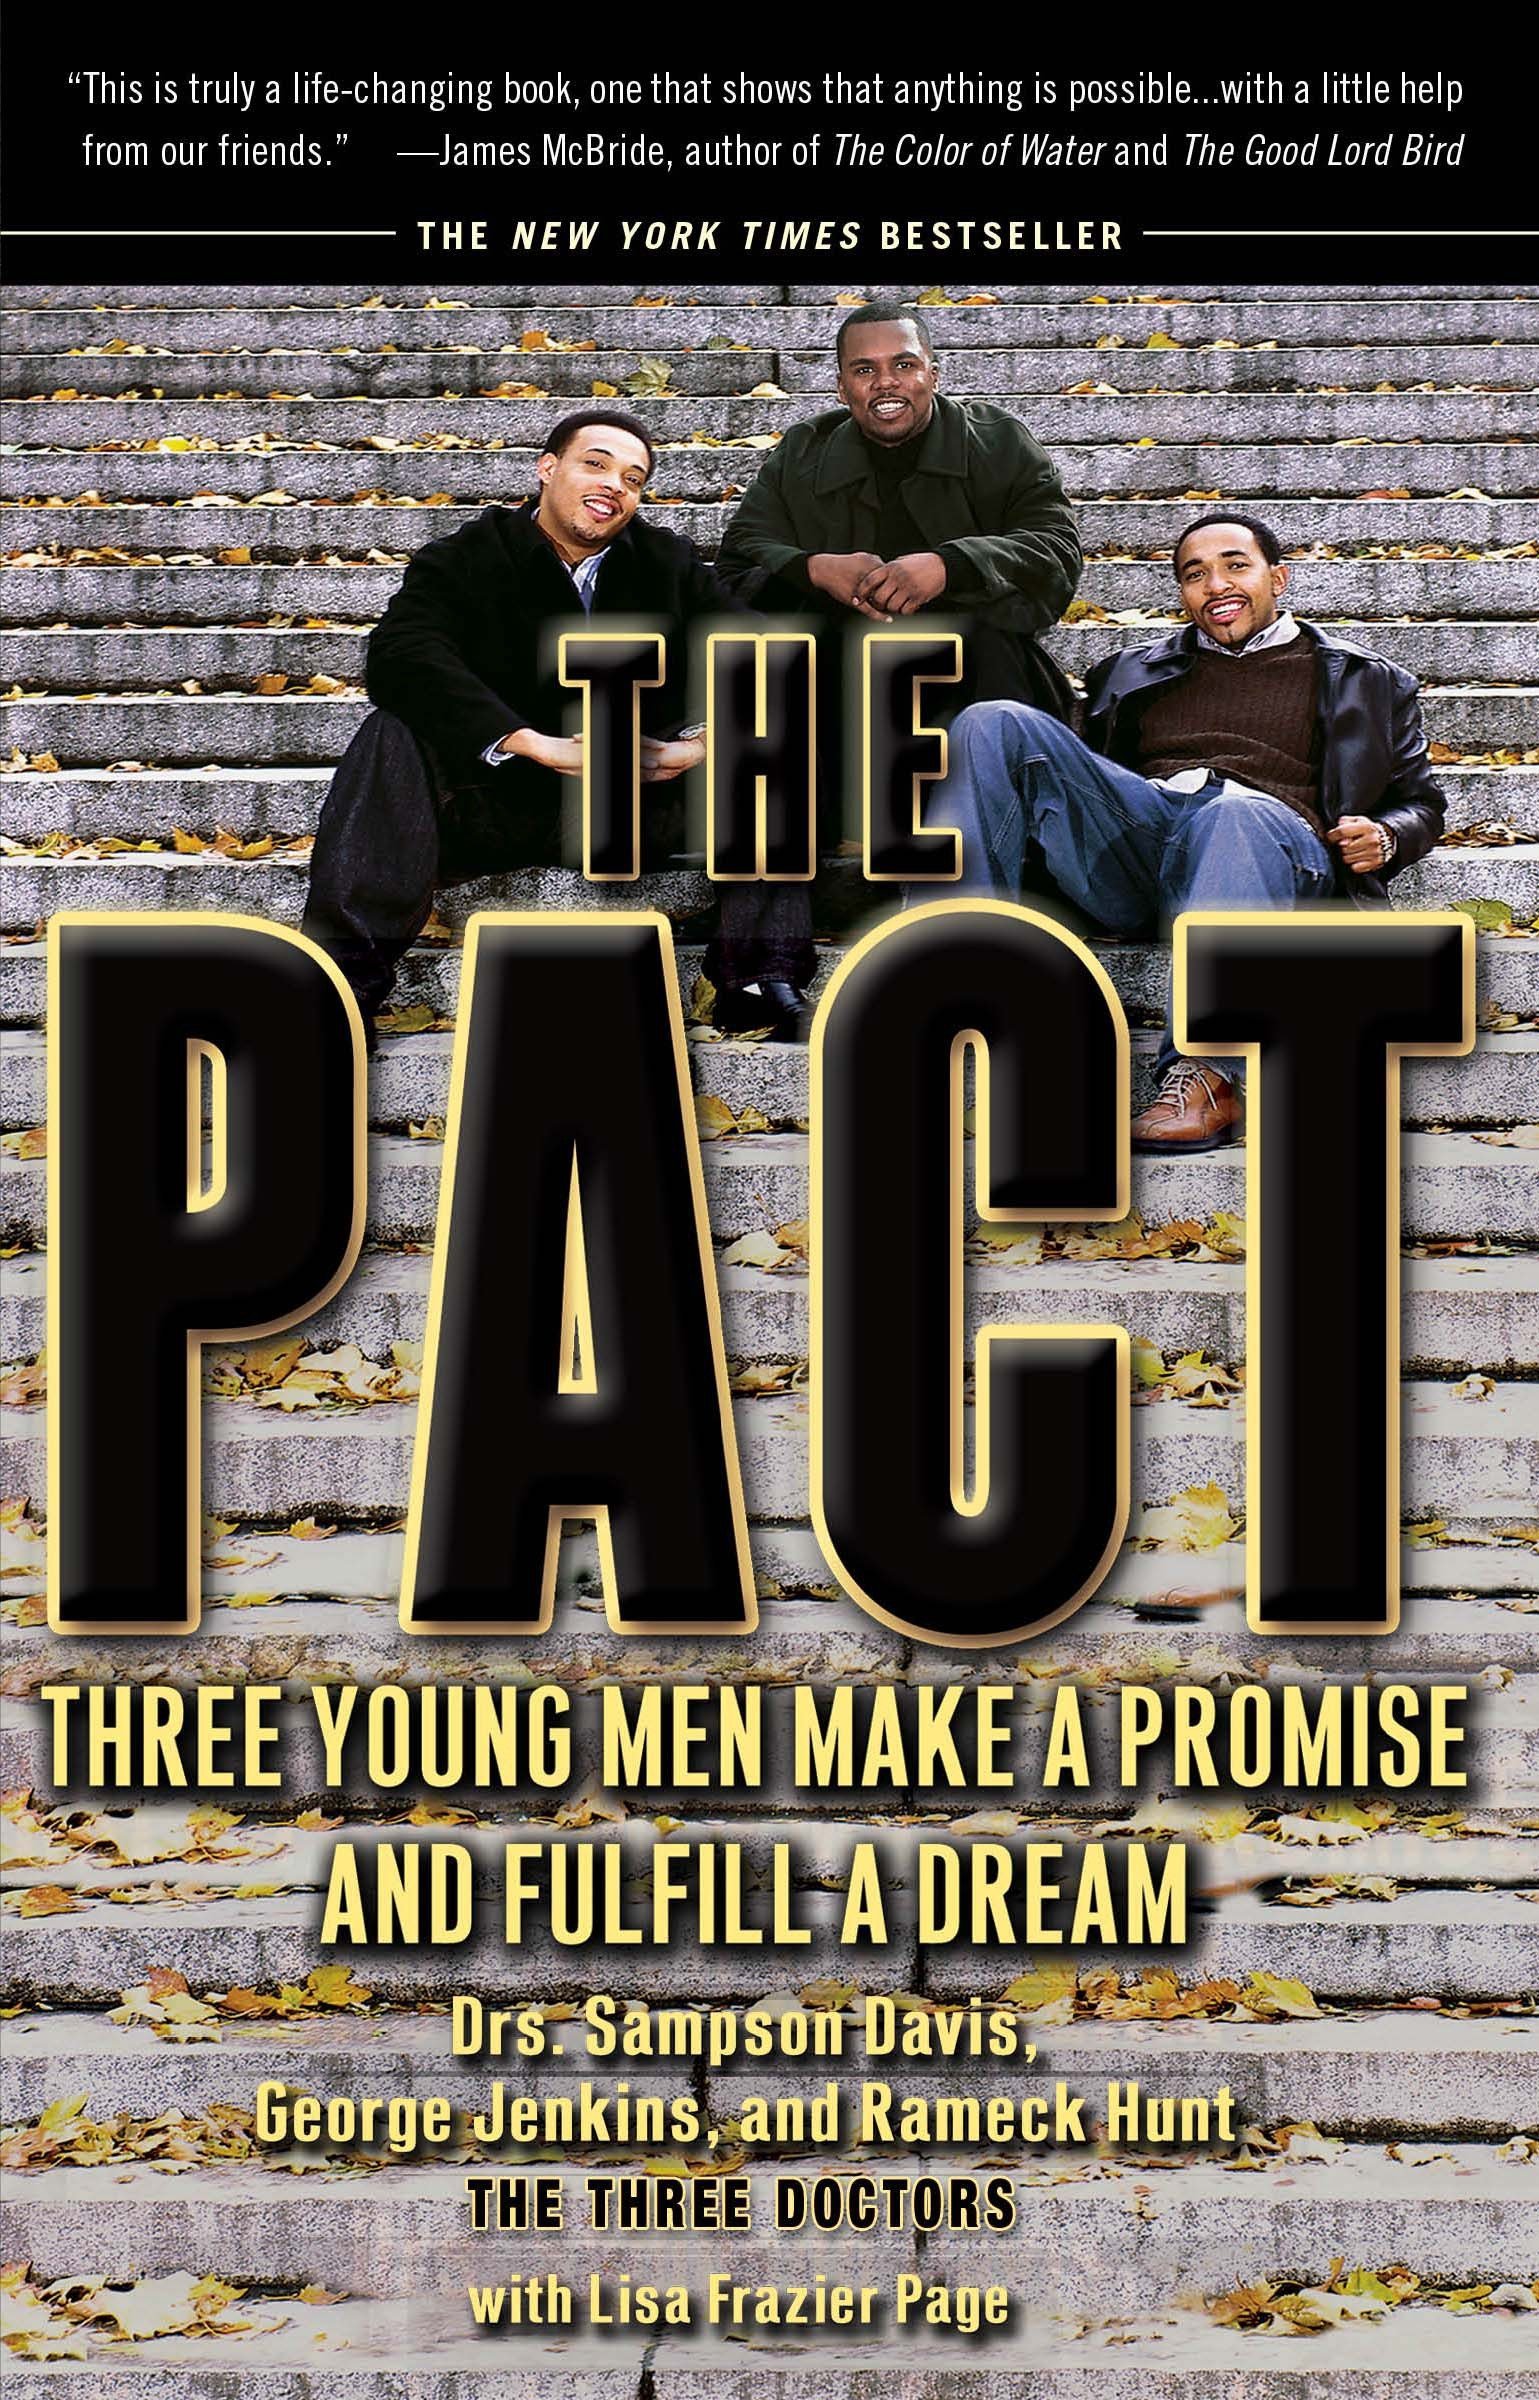 "The PACT," written by Dr. Sampson Davis, Dr. George Jenkins and Dr. Rameck Hunt